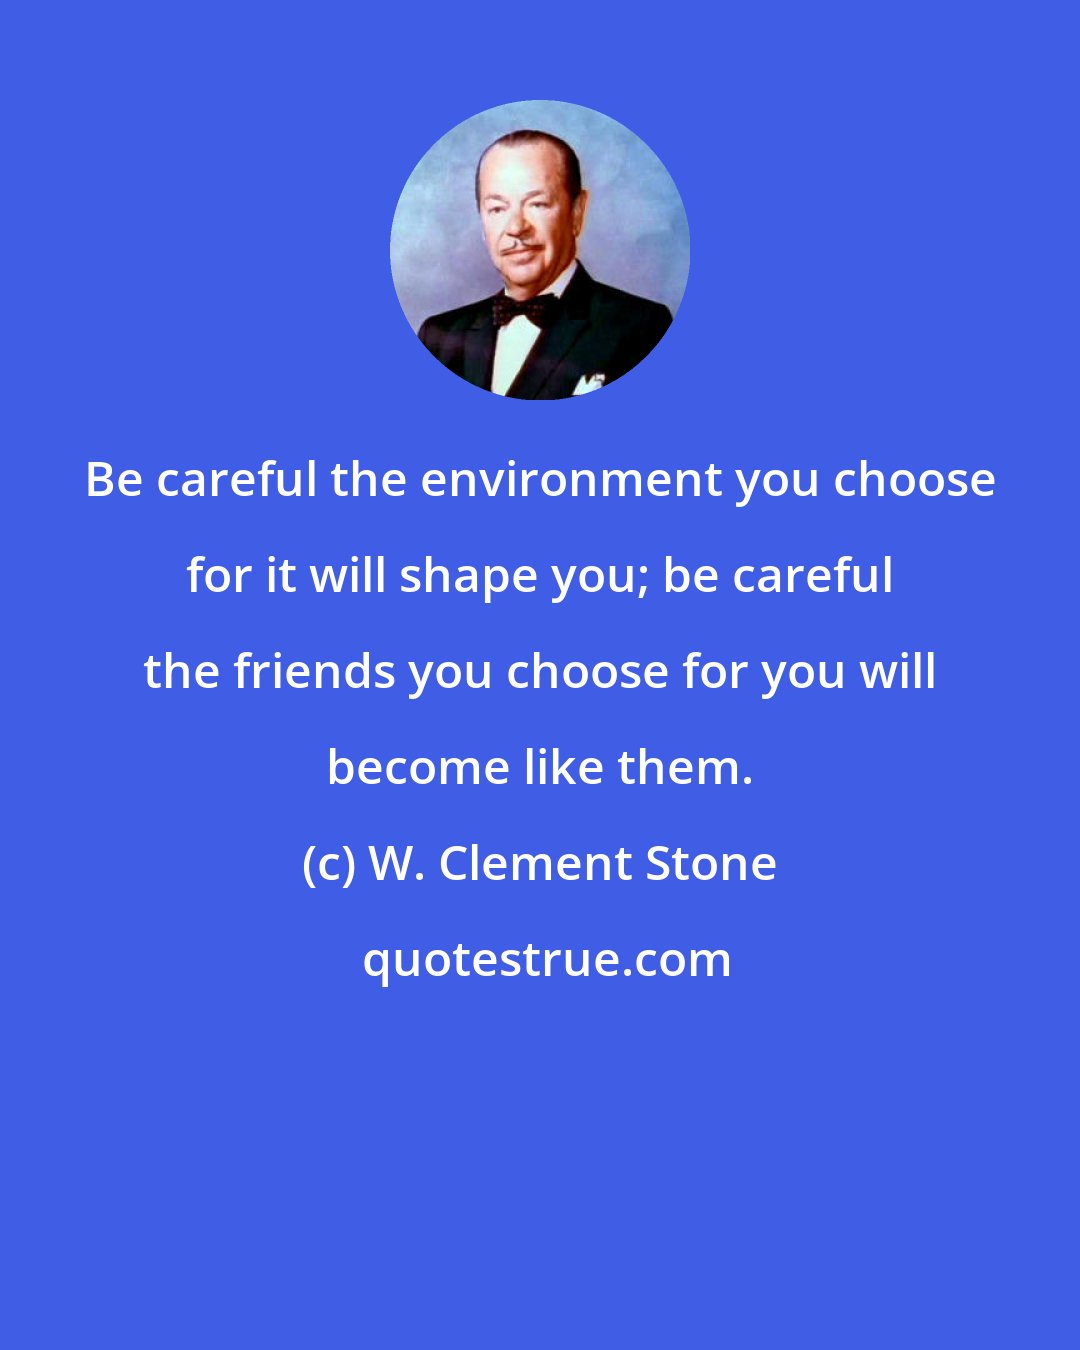 W. Clement Stone: Be careful the environment you choose for it will shape you; be careful the friends you choose for you will become like them.